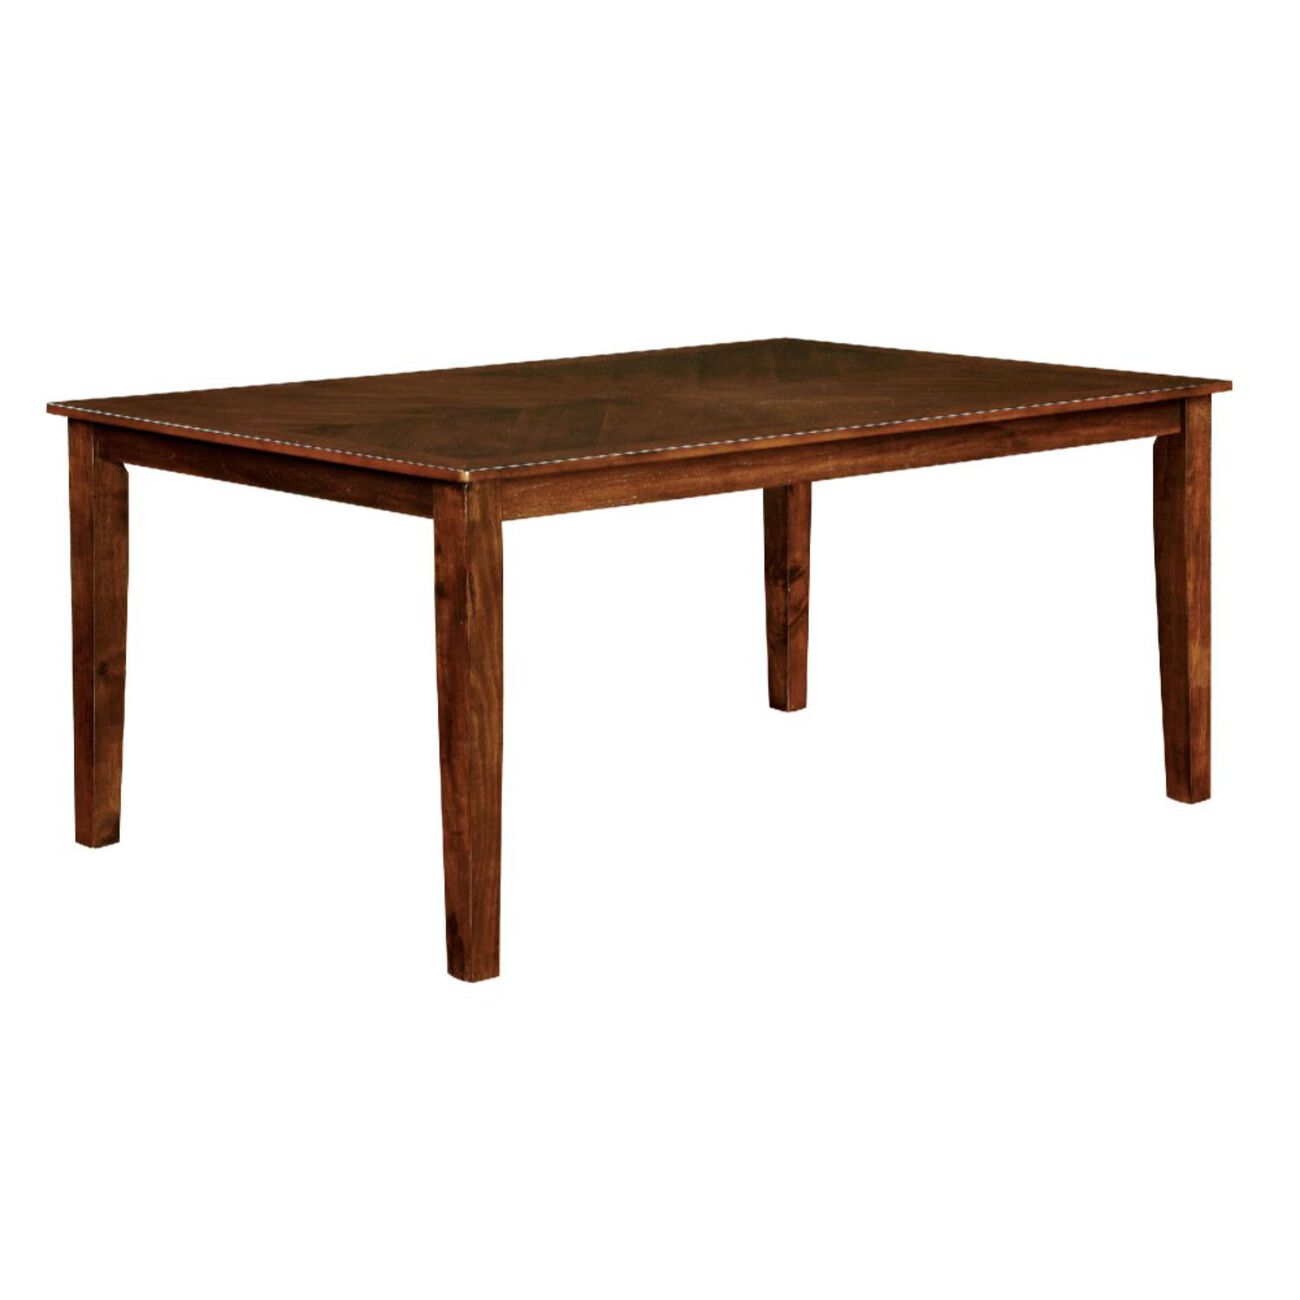 Hillsview I Transitional Dining Table, Brown Cherry